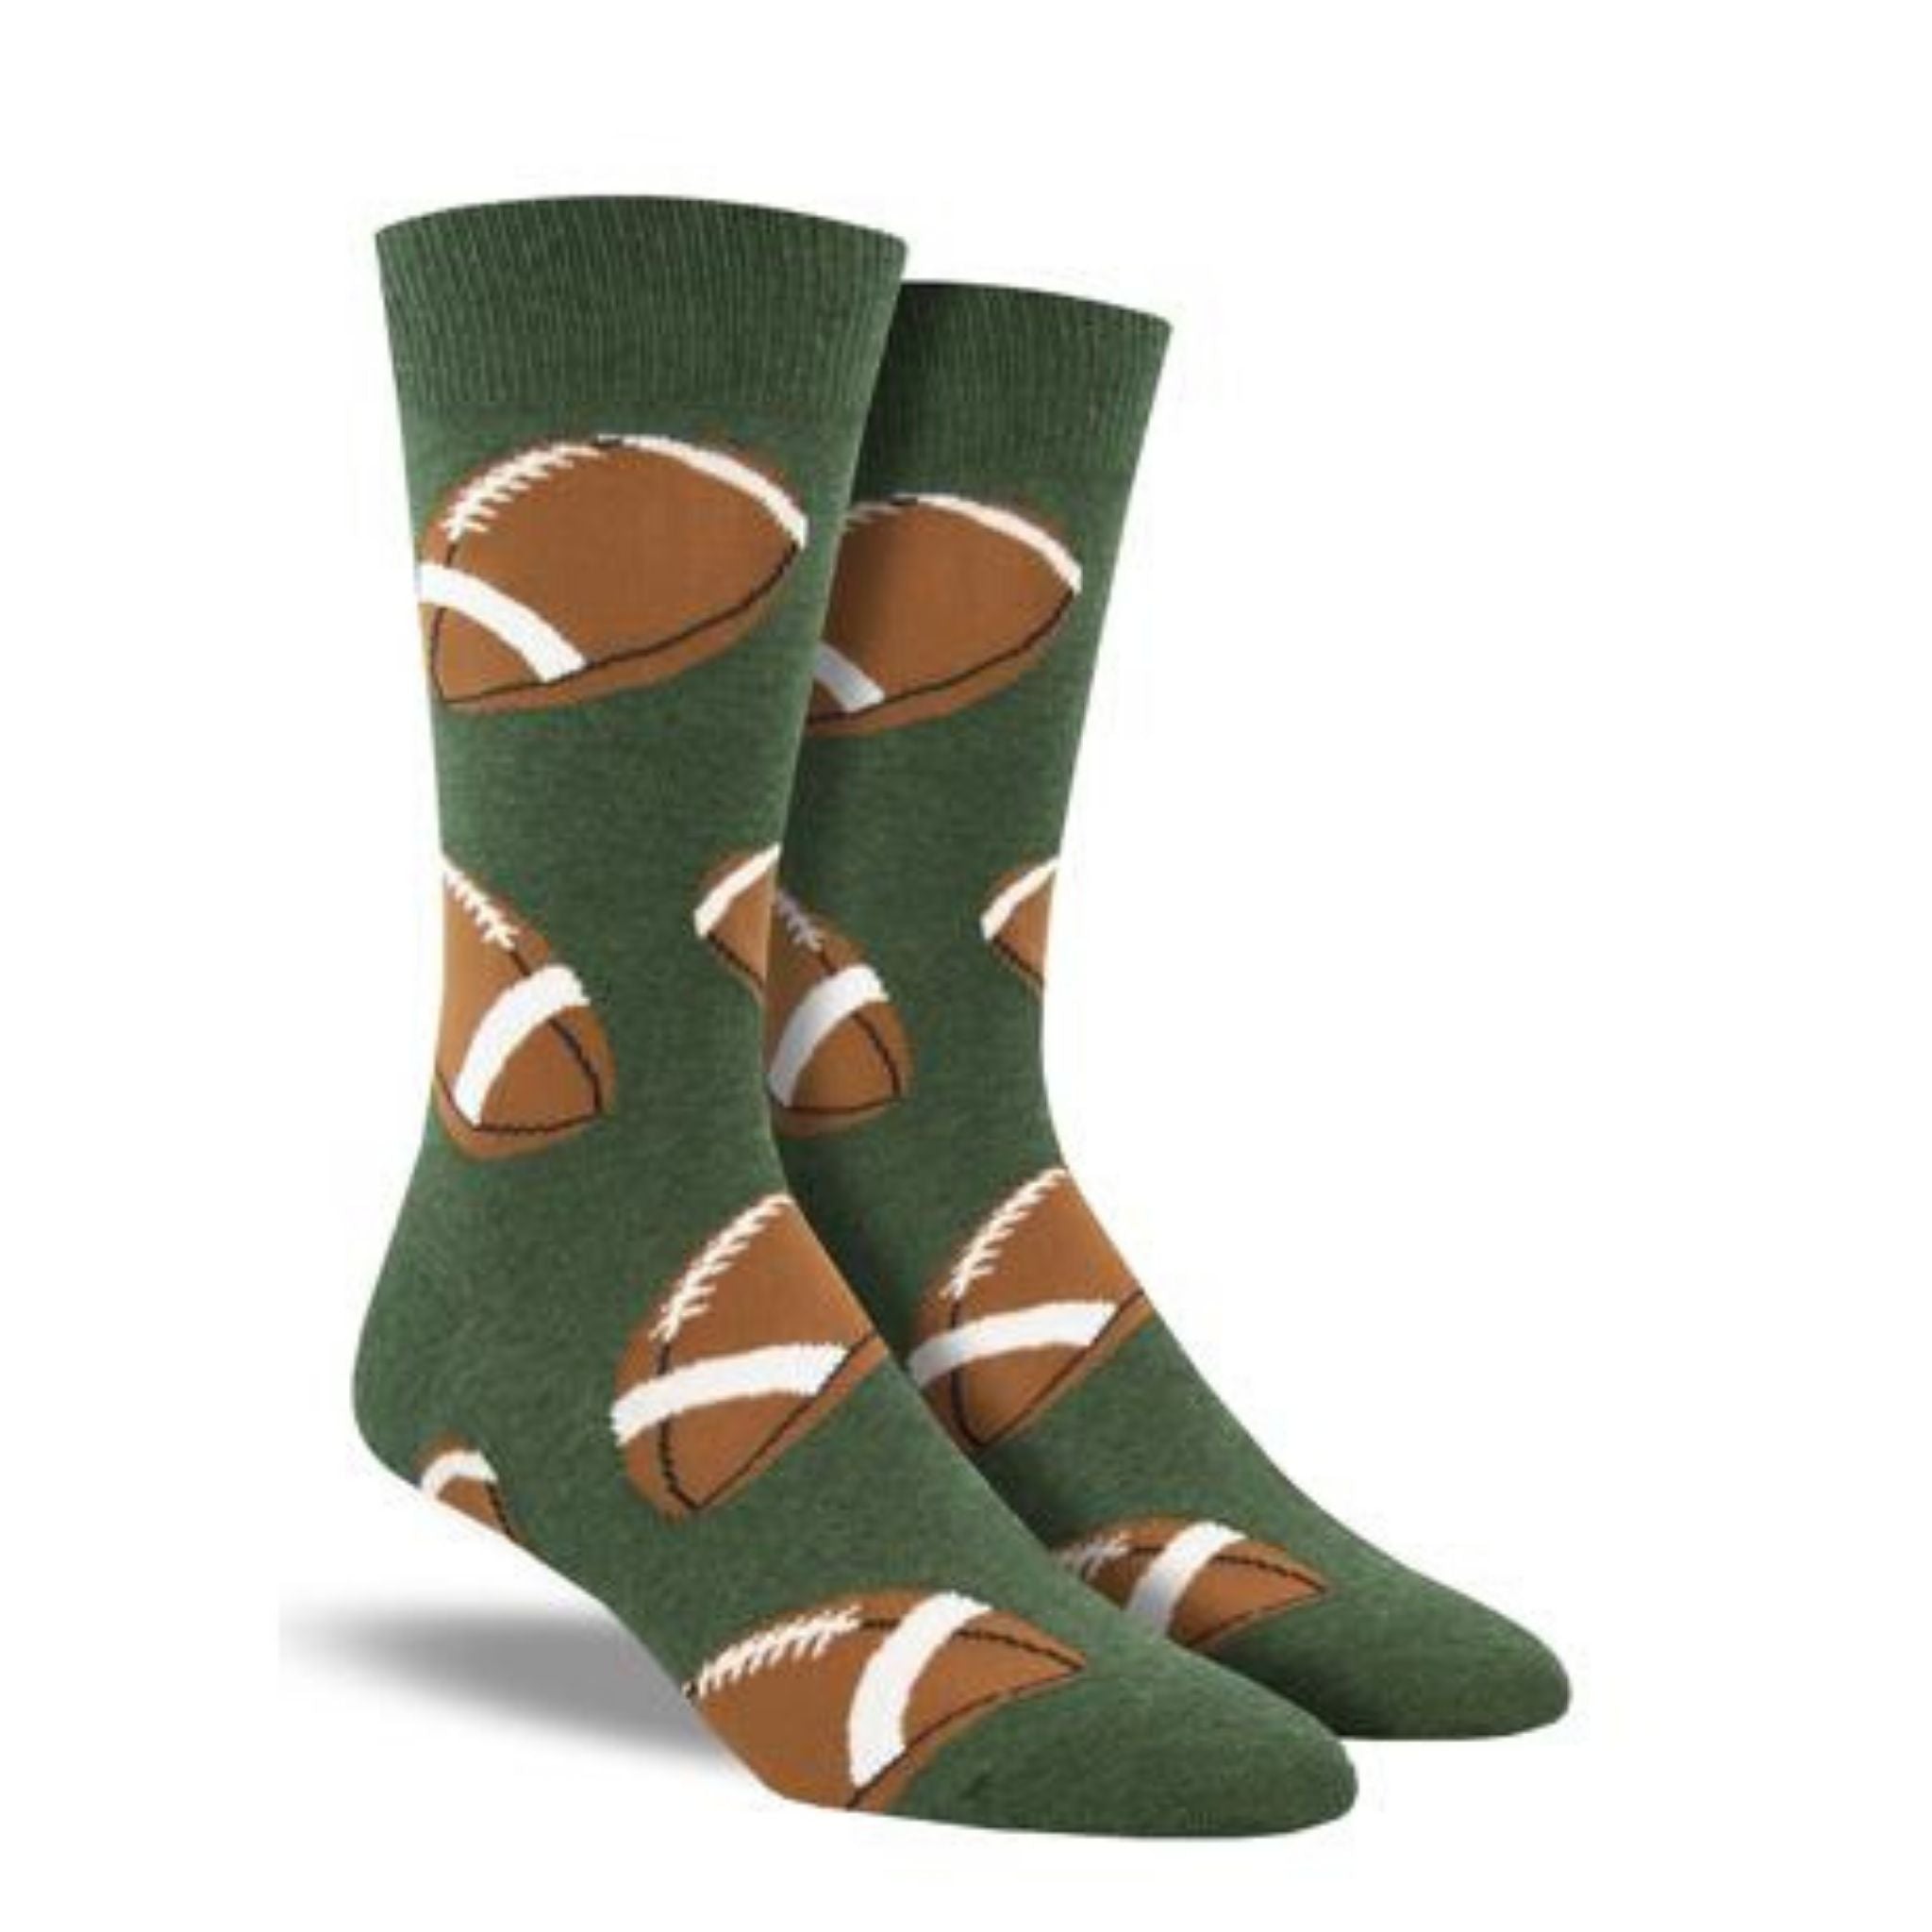 A pair of men's green crew socks with footballs on them.